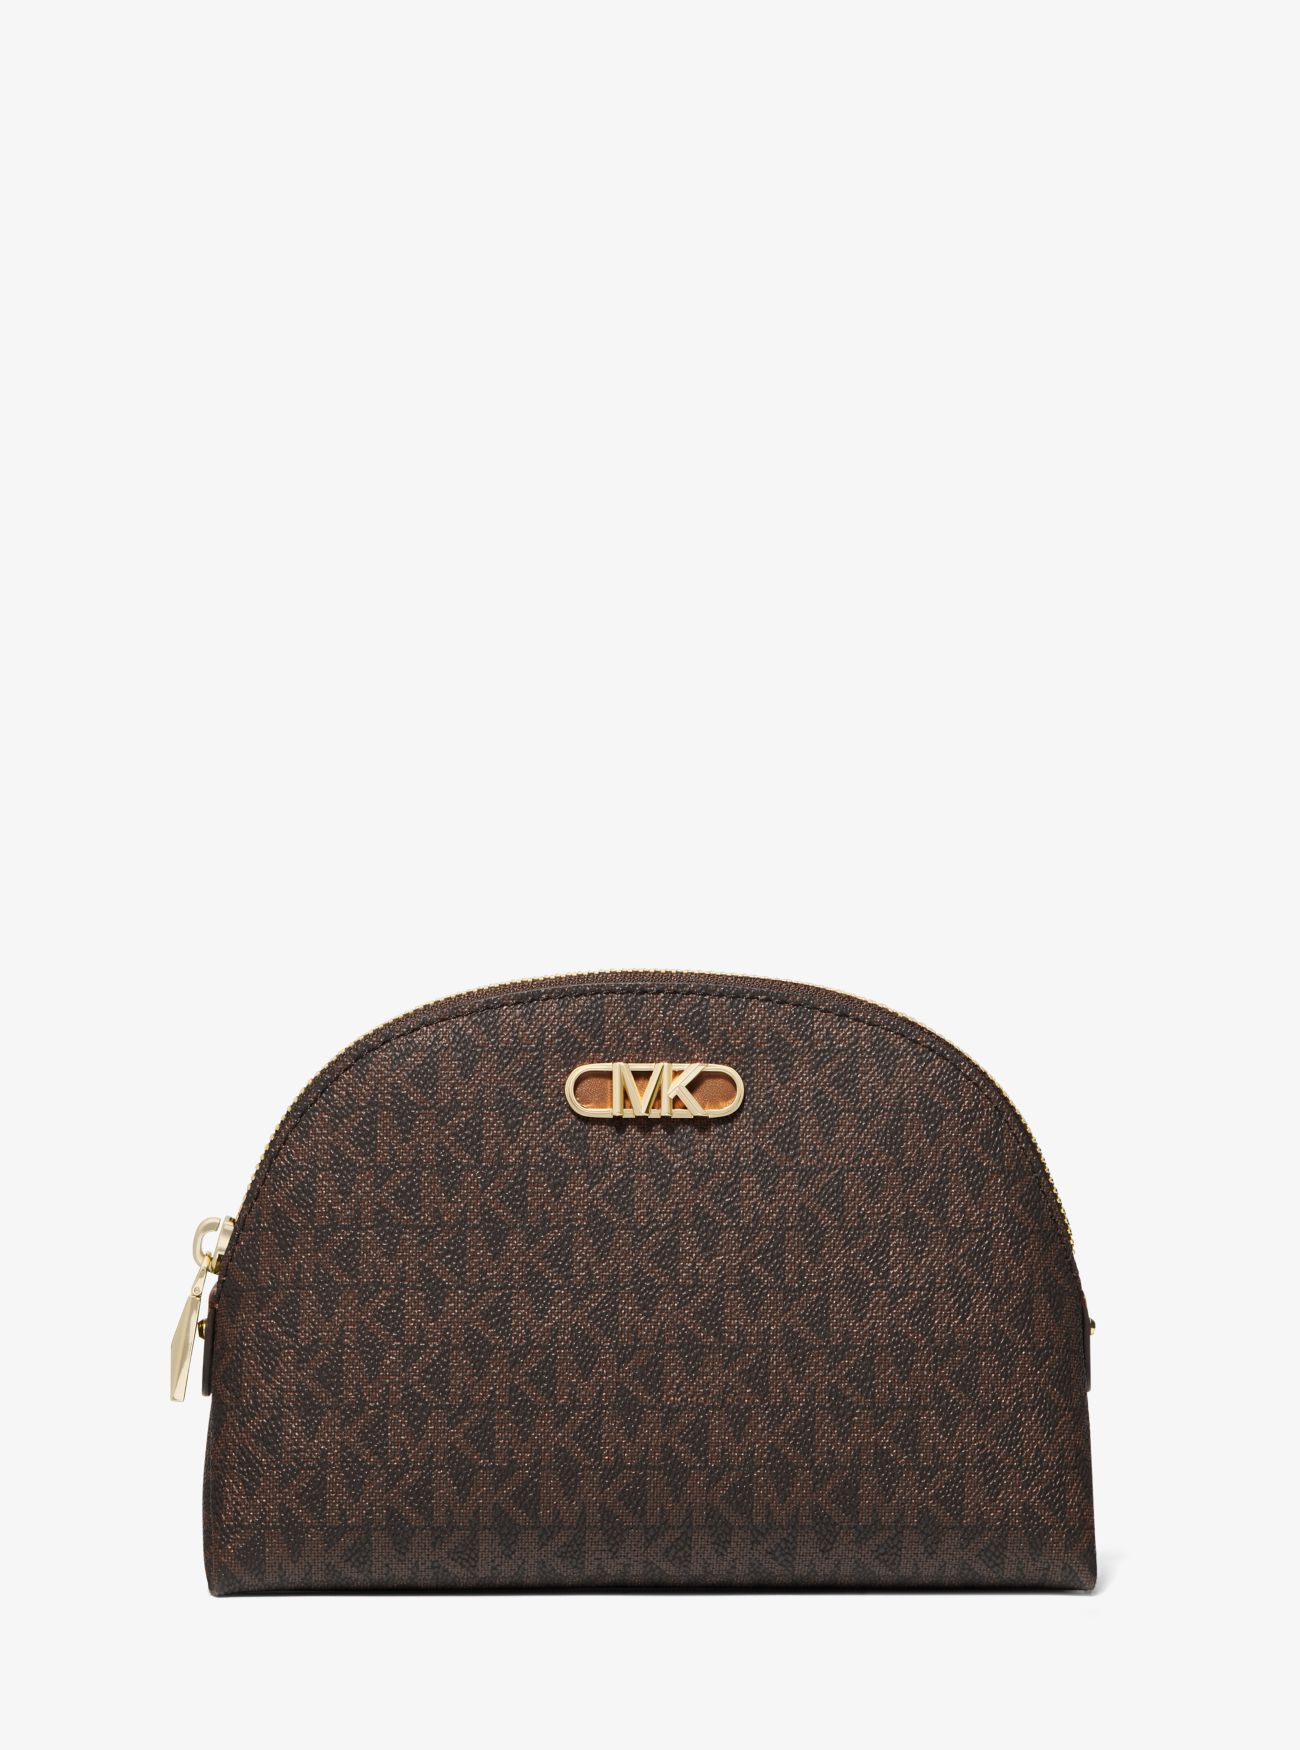 MK Empire Large Travel Pouch - Brown - Michael Kors